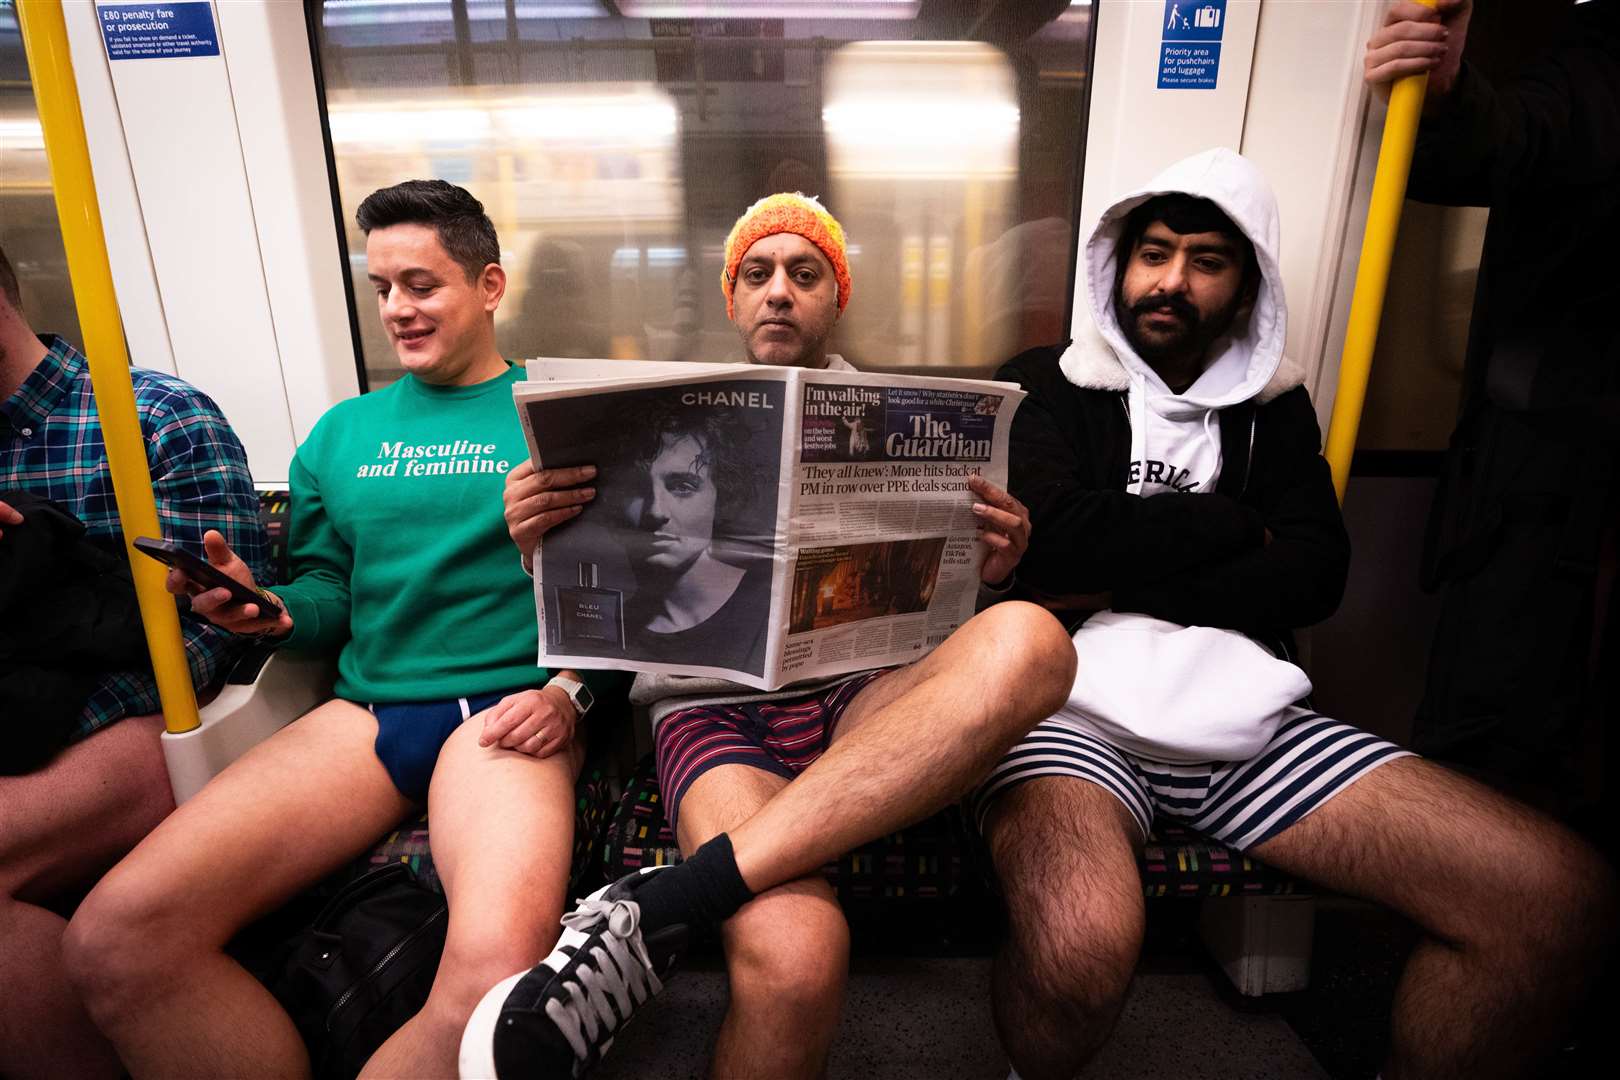 People riding a Circle line Tube as they take part in the annual No Trousers Tube Ride in London (James Manning/PA)